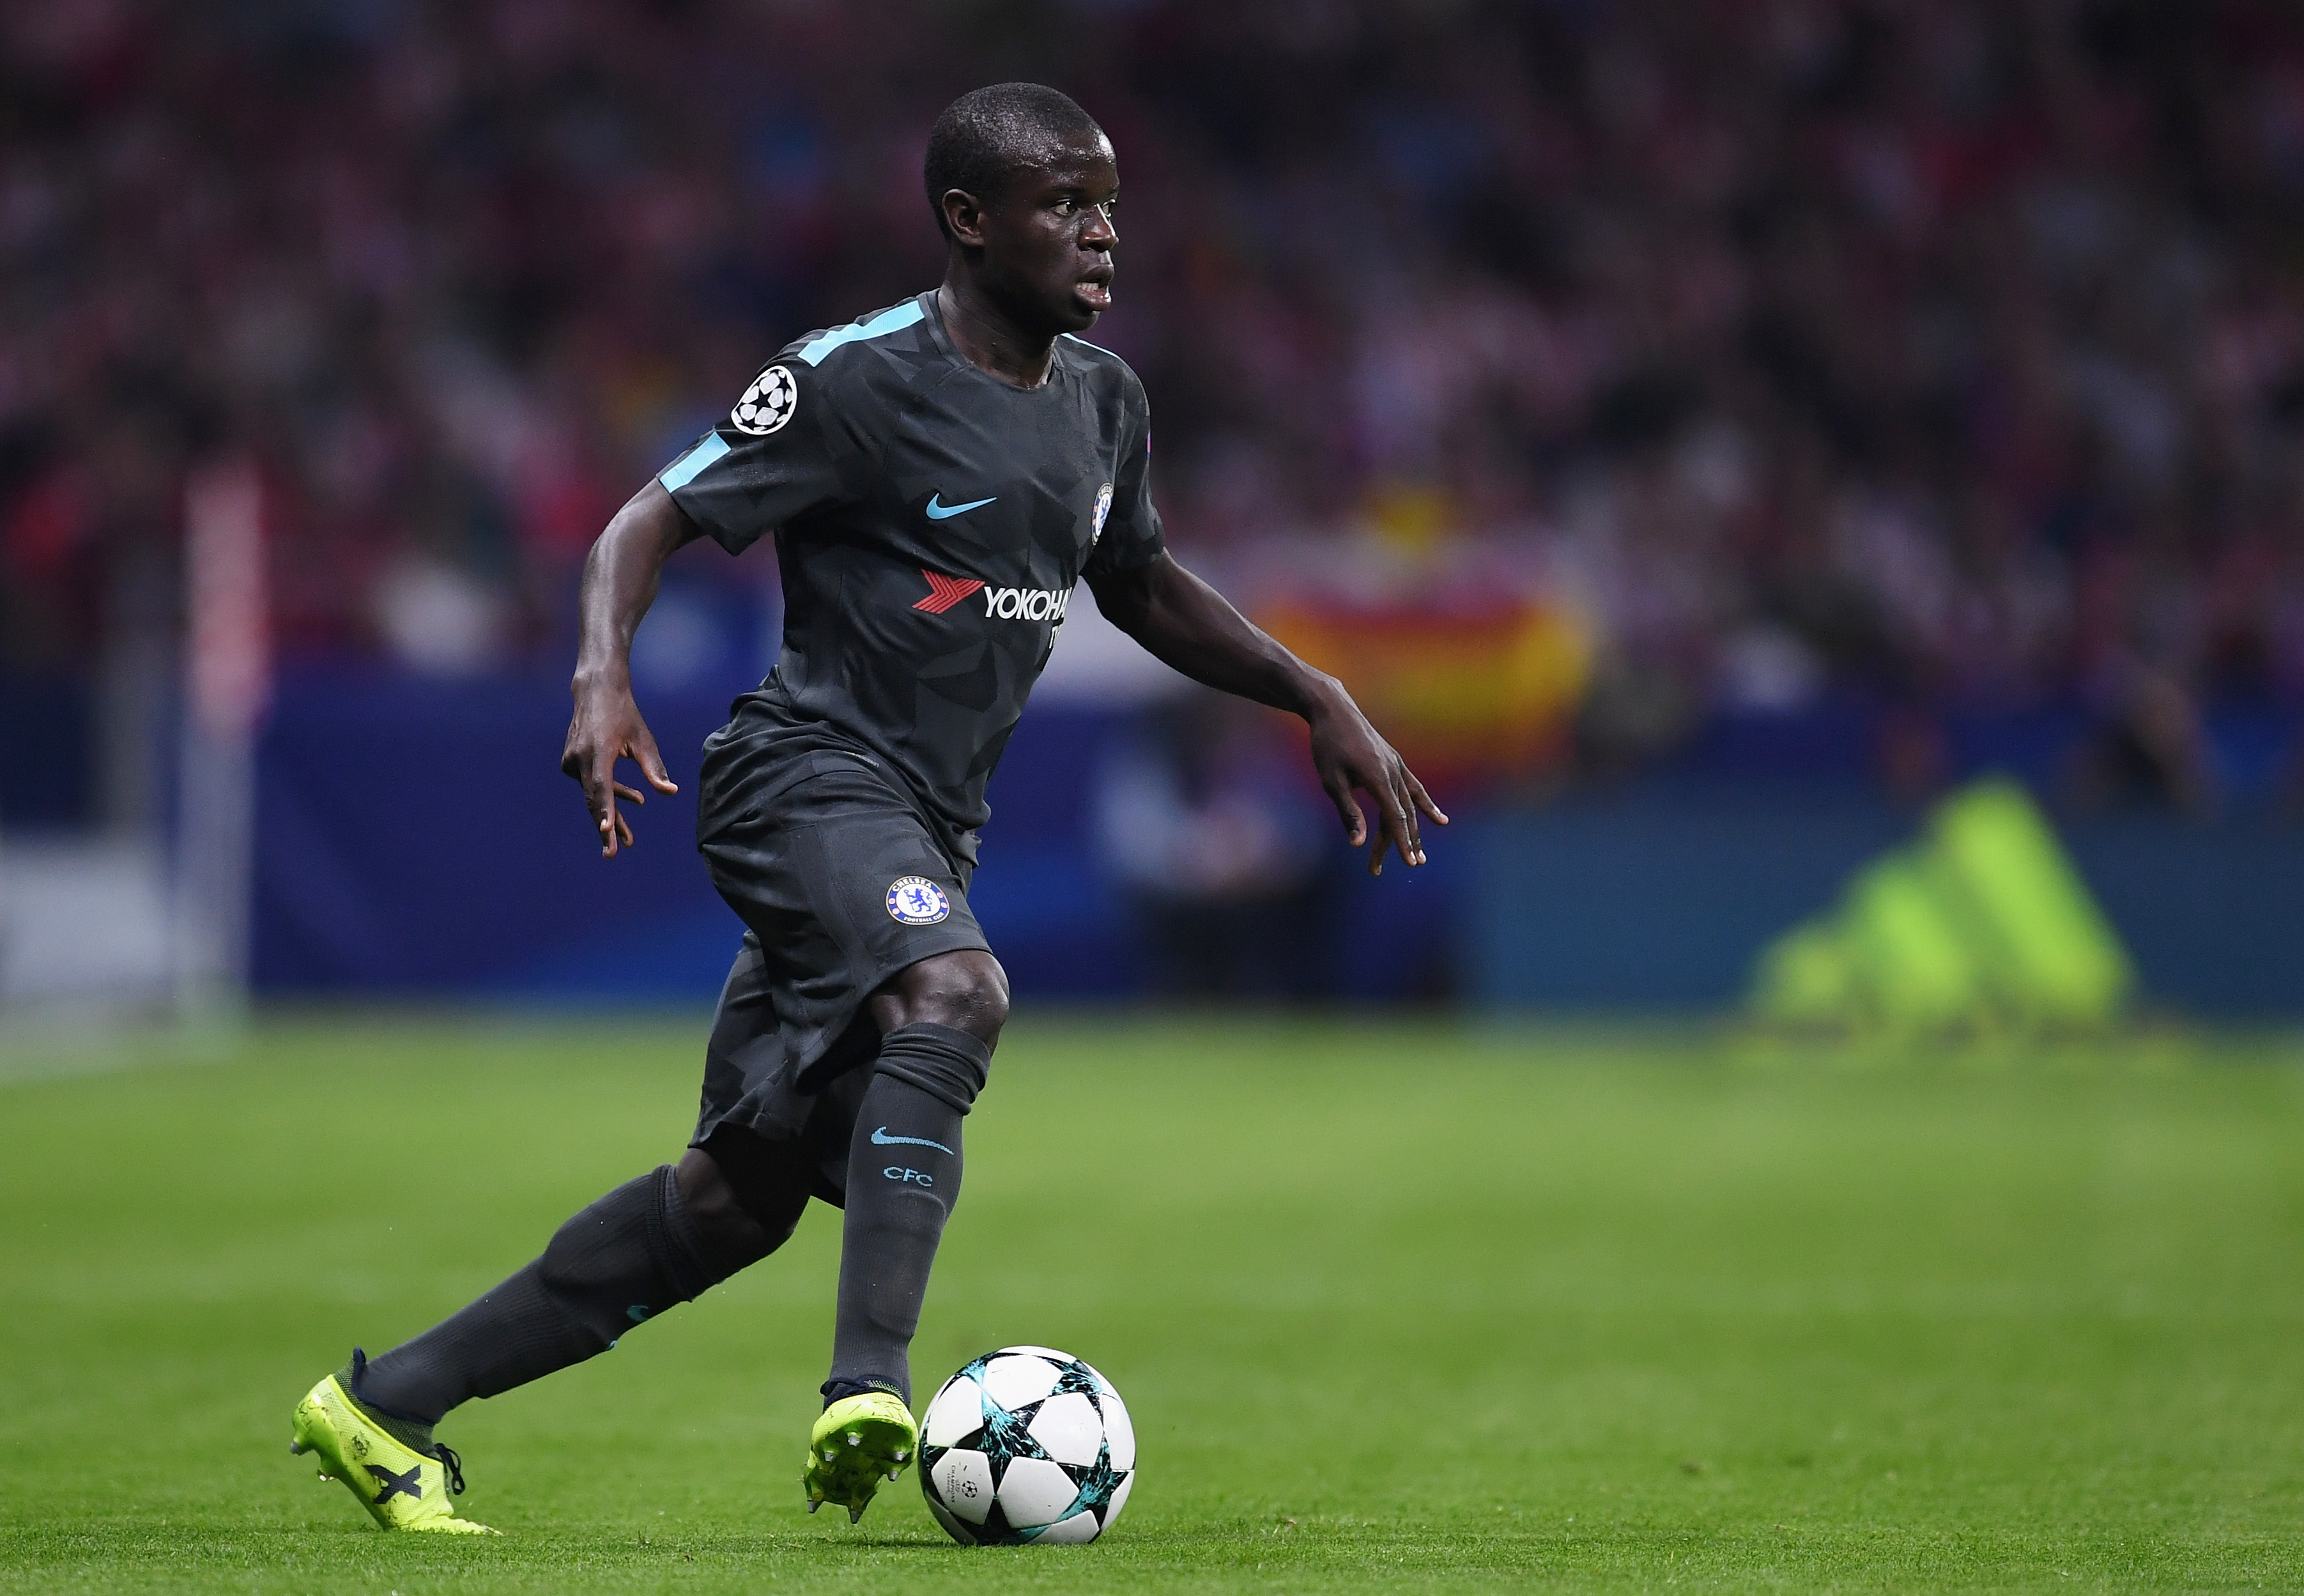 MADRID, SPAIN - SEPTEMBER 27:  N'Golo Kante of Chelsea in action during the UEFA Champions League group C match between Atletico Madrid and Chelsea FC at Estadio Wanda Metropolitano on September 27, 2017 in Madrid, Spain.  (Photo by David Ramos/Getty Images)